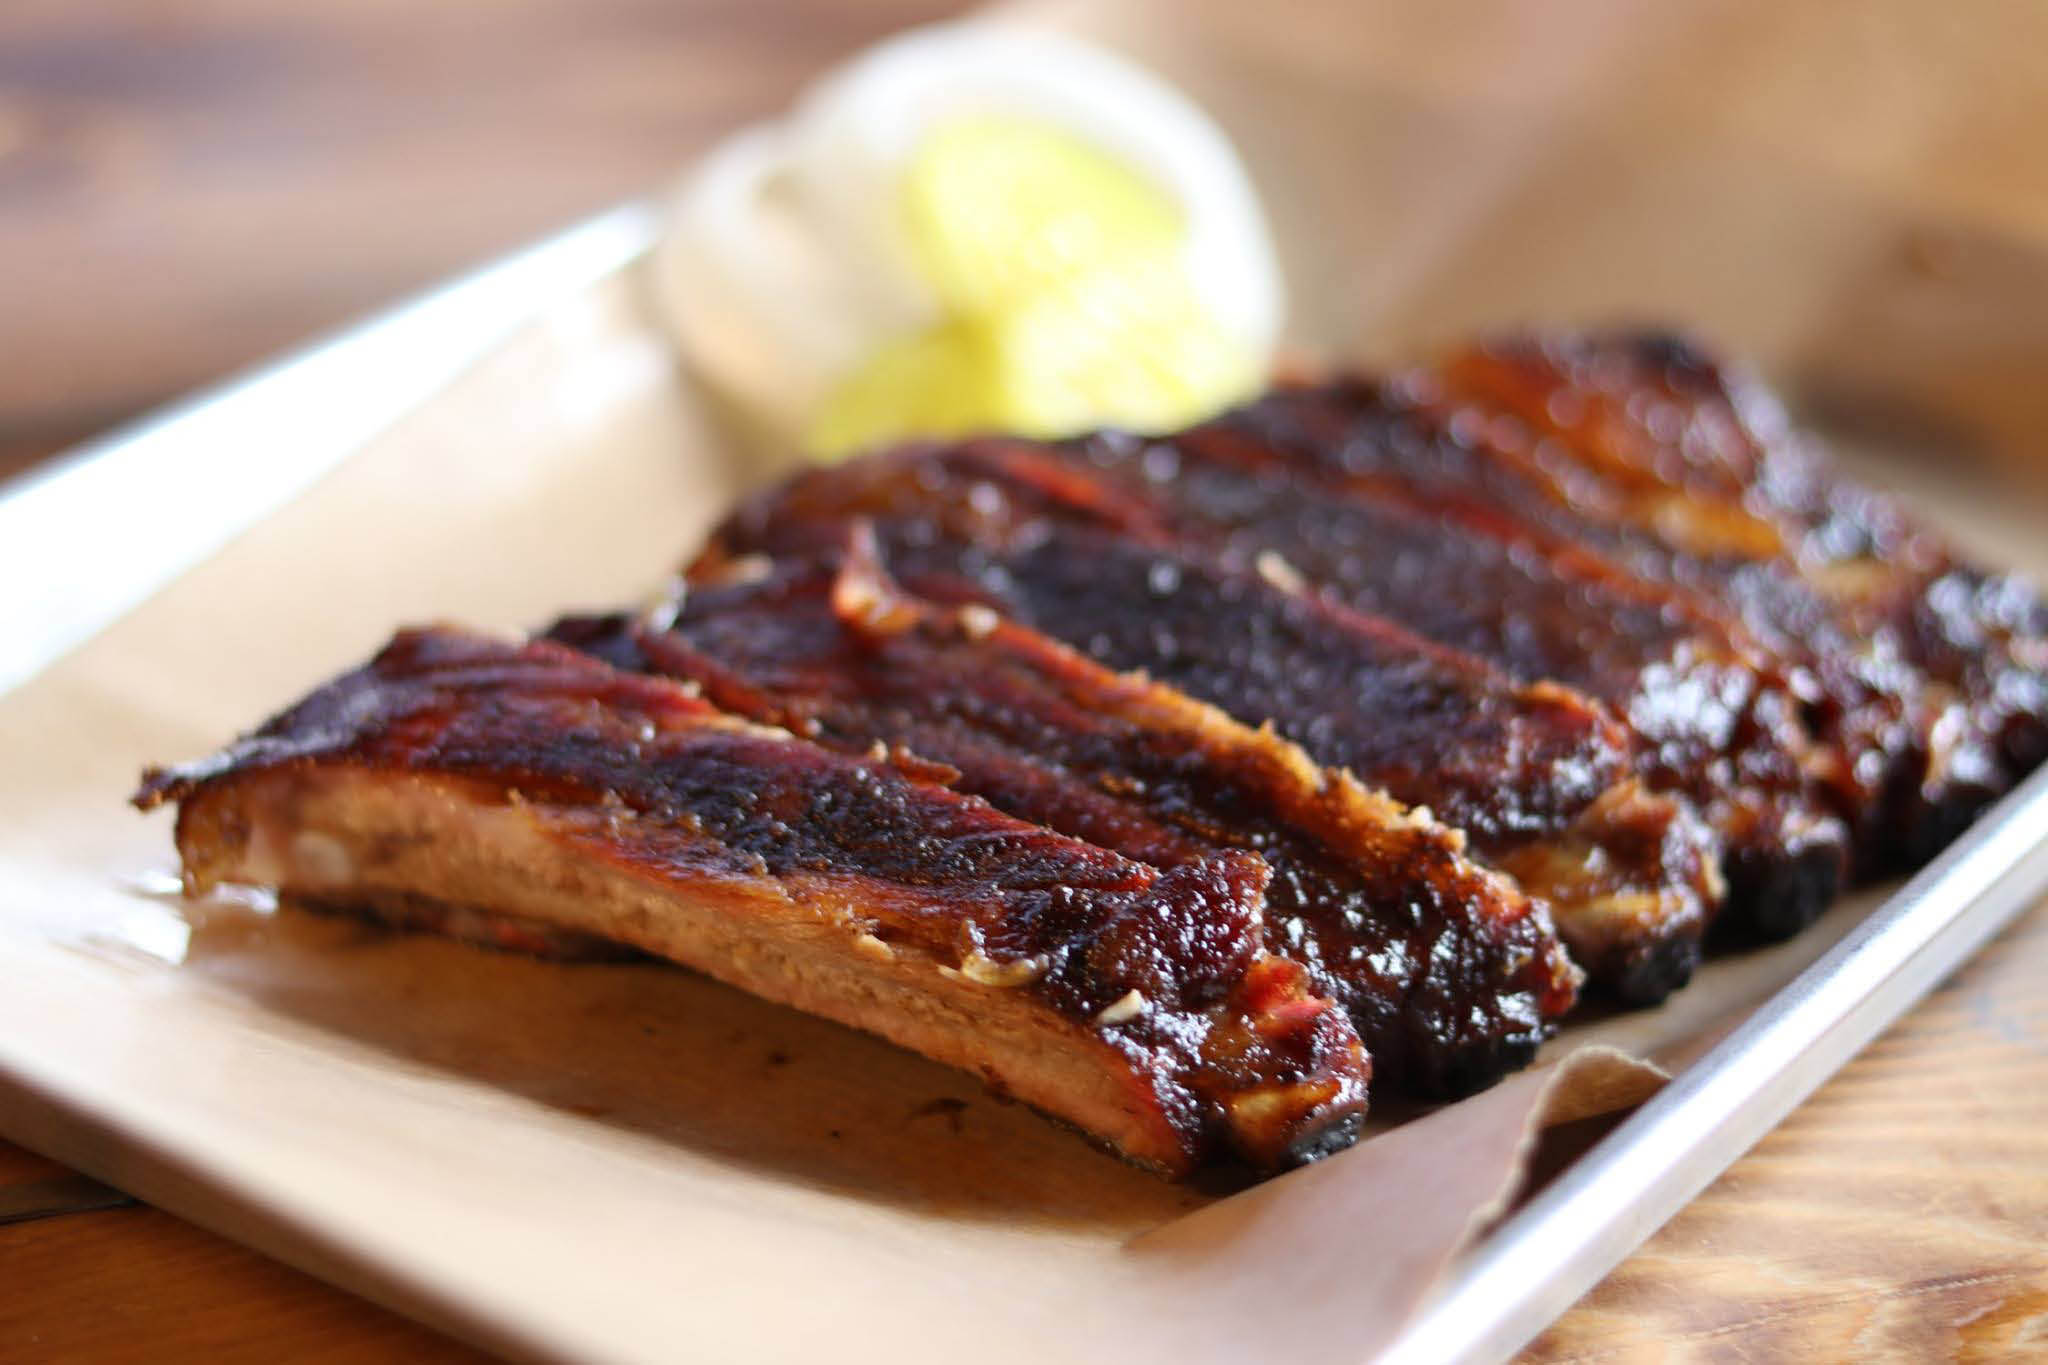 Dickey's BBQ Franchise for Sale in NW Florida - Six Figure Earnings